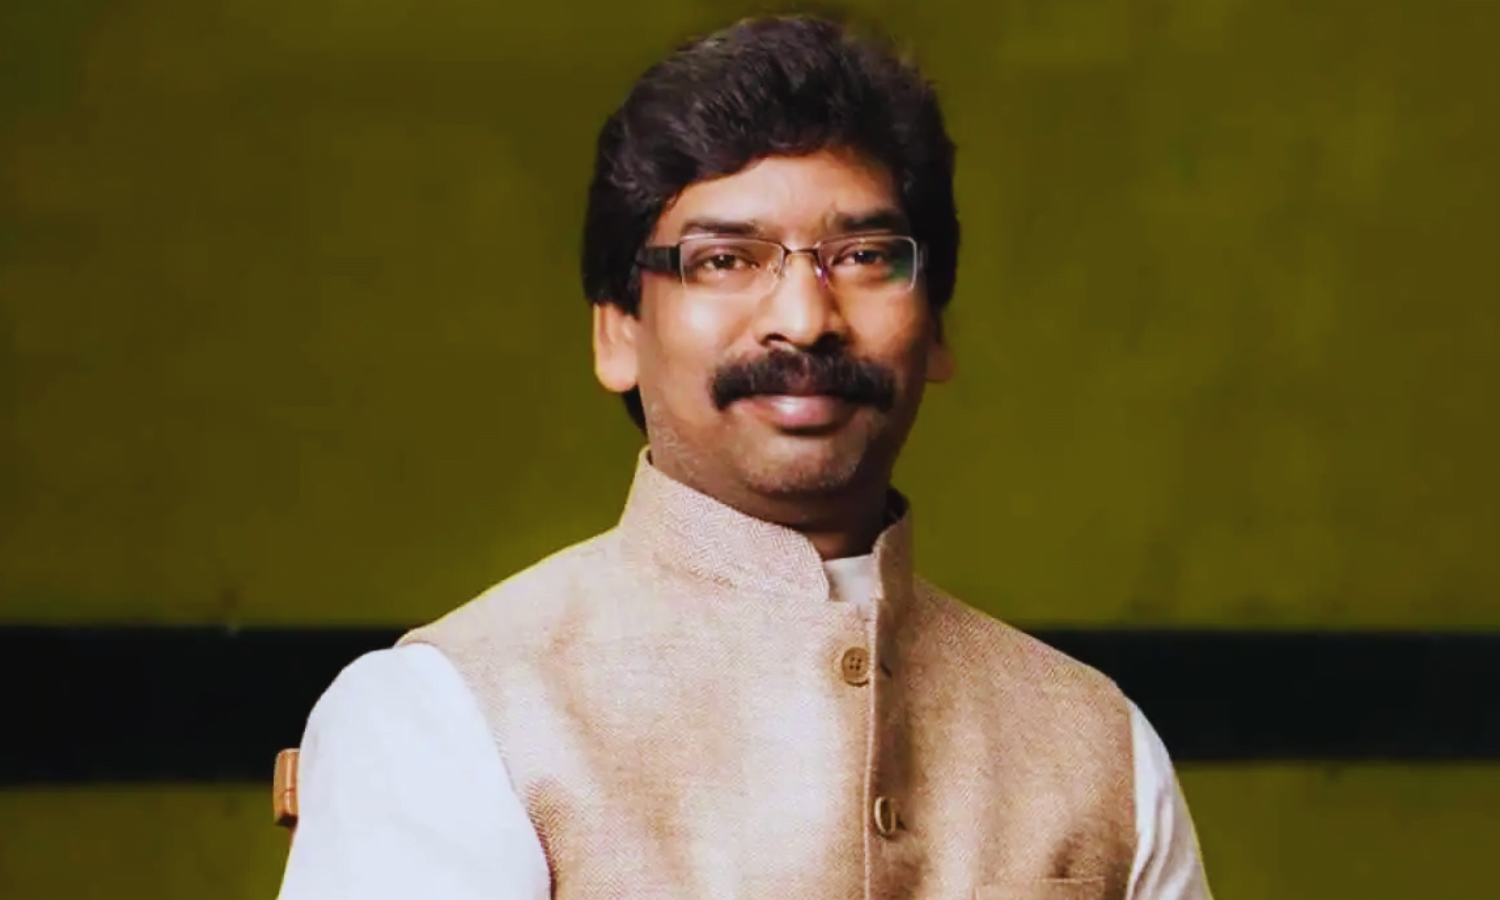 Chief Minister Hemant Soren is scheduled to visit Khunti